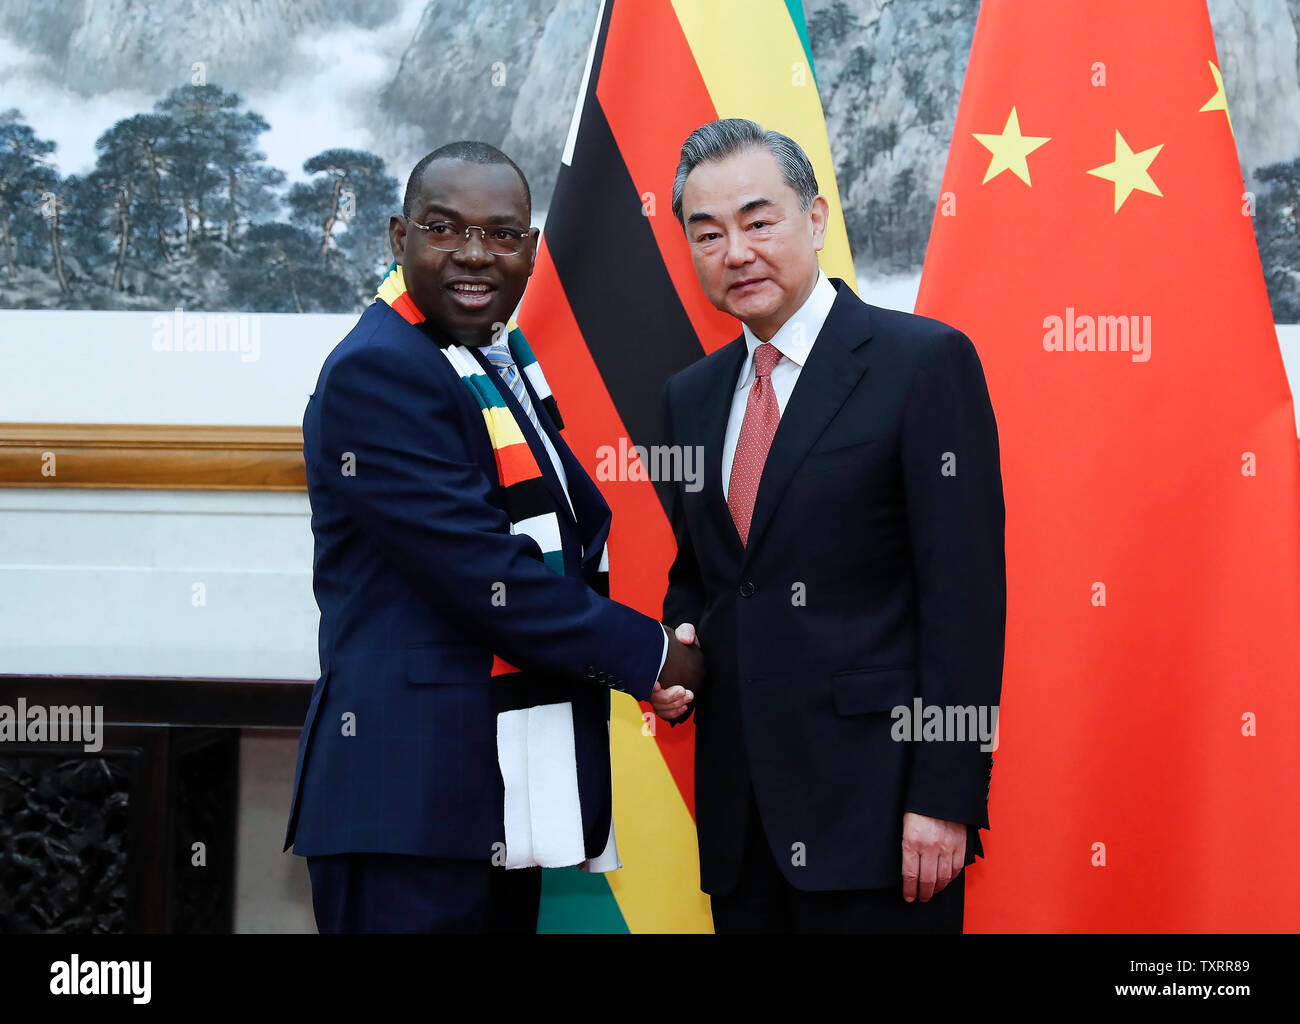 Beijing, China. 25th June, 2019. Chinese State Councilor and Foreign Minister Wang Yi (R) meets with Zimbabwe's Foreign Affairs and International Trade Minister Sibusiso Moyo in Beijing, capital of China, June 25, 2019. Credit: Liu Bin/Xinhua/Alamy Live News Stock Photo